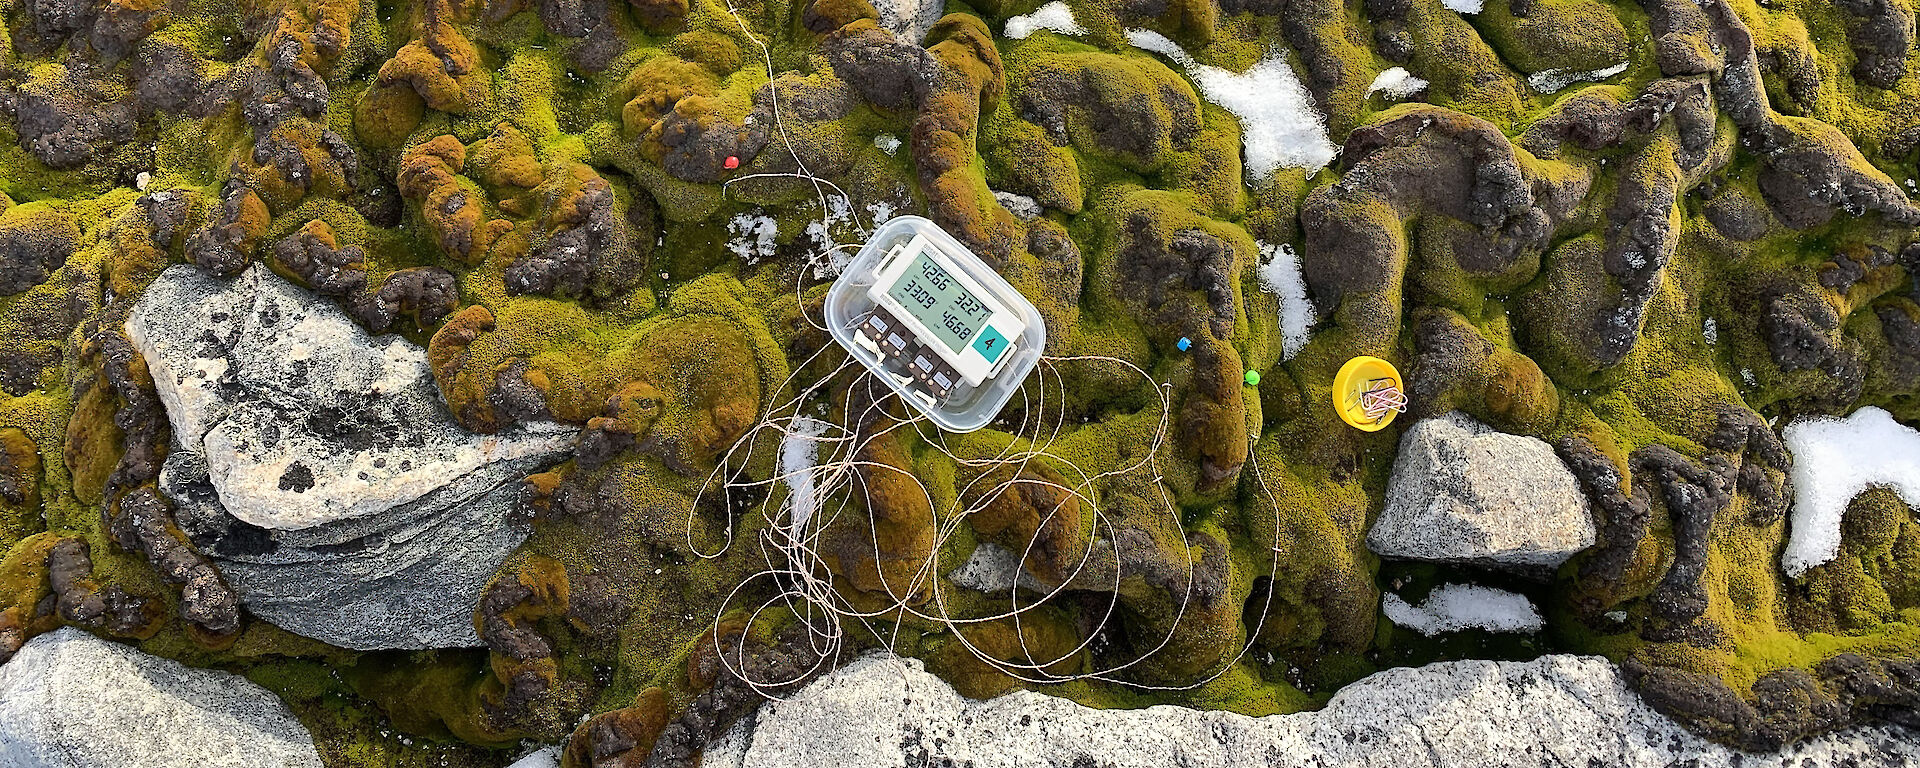 A bumpy Antarctic moss bed with wires and a device on it